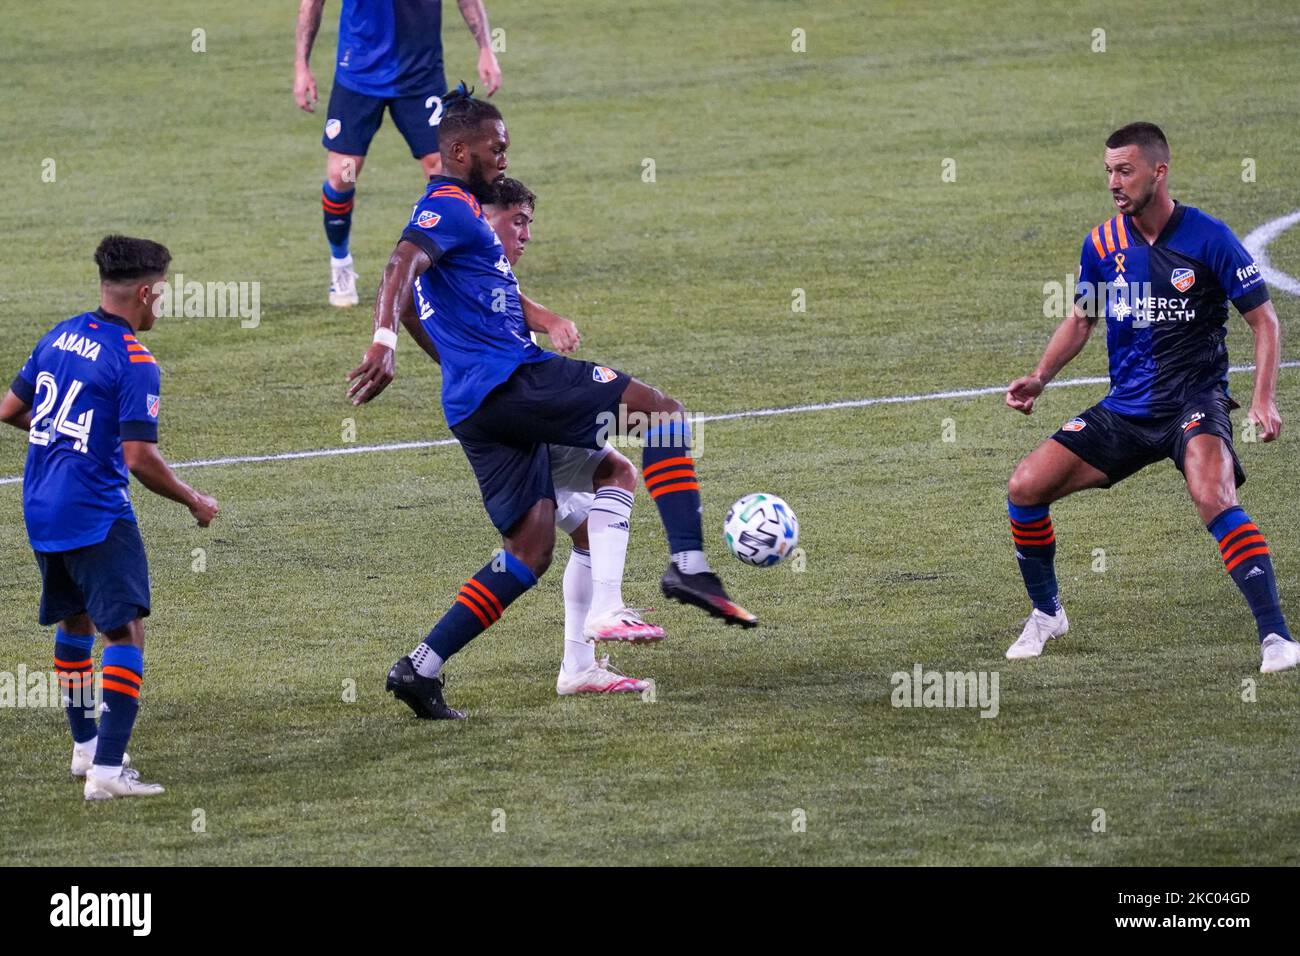 FC Cincinnati defender and team captain, Kendall Waston, clears the ball from goal during a MLS soccer match between FC Cincinnati and the Chicago Fire that ended in a 0-0 draw at Nippert Stadium, Wednesday, September 2nd, 2020, in Cincinnati, OH. (Photo by Jason Whitman/NurPhoto) Stock Photo